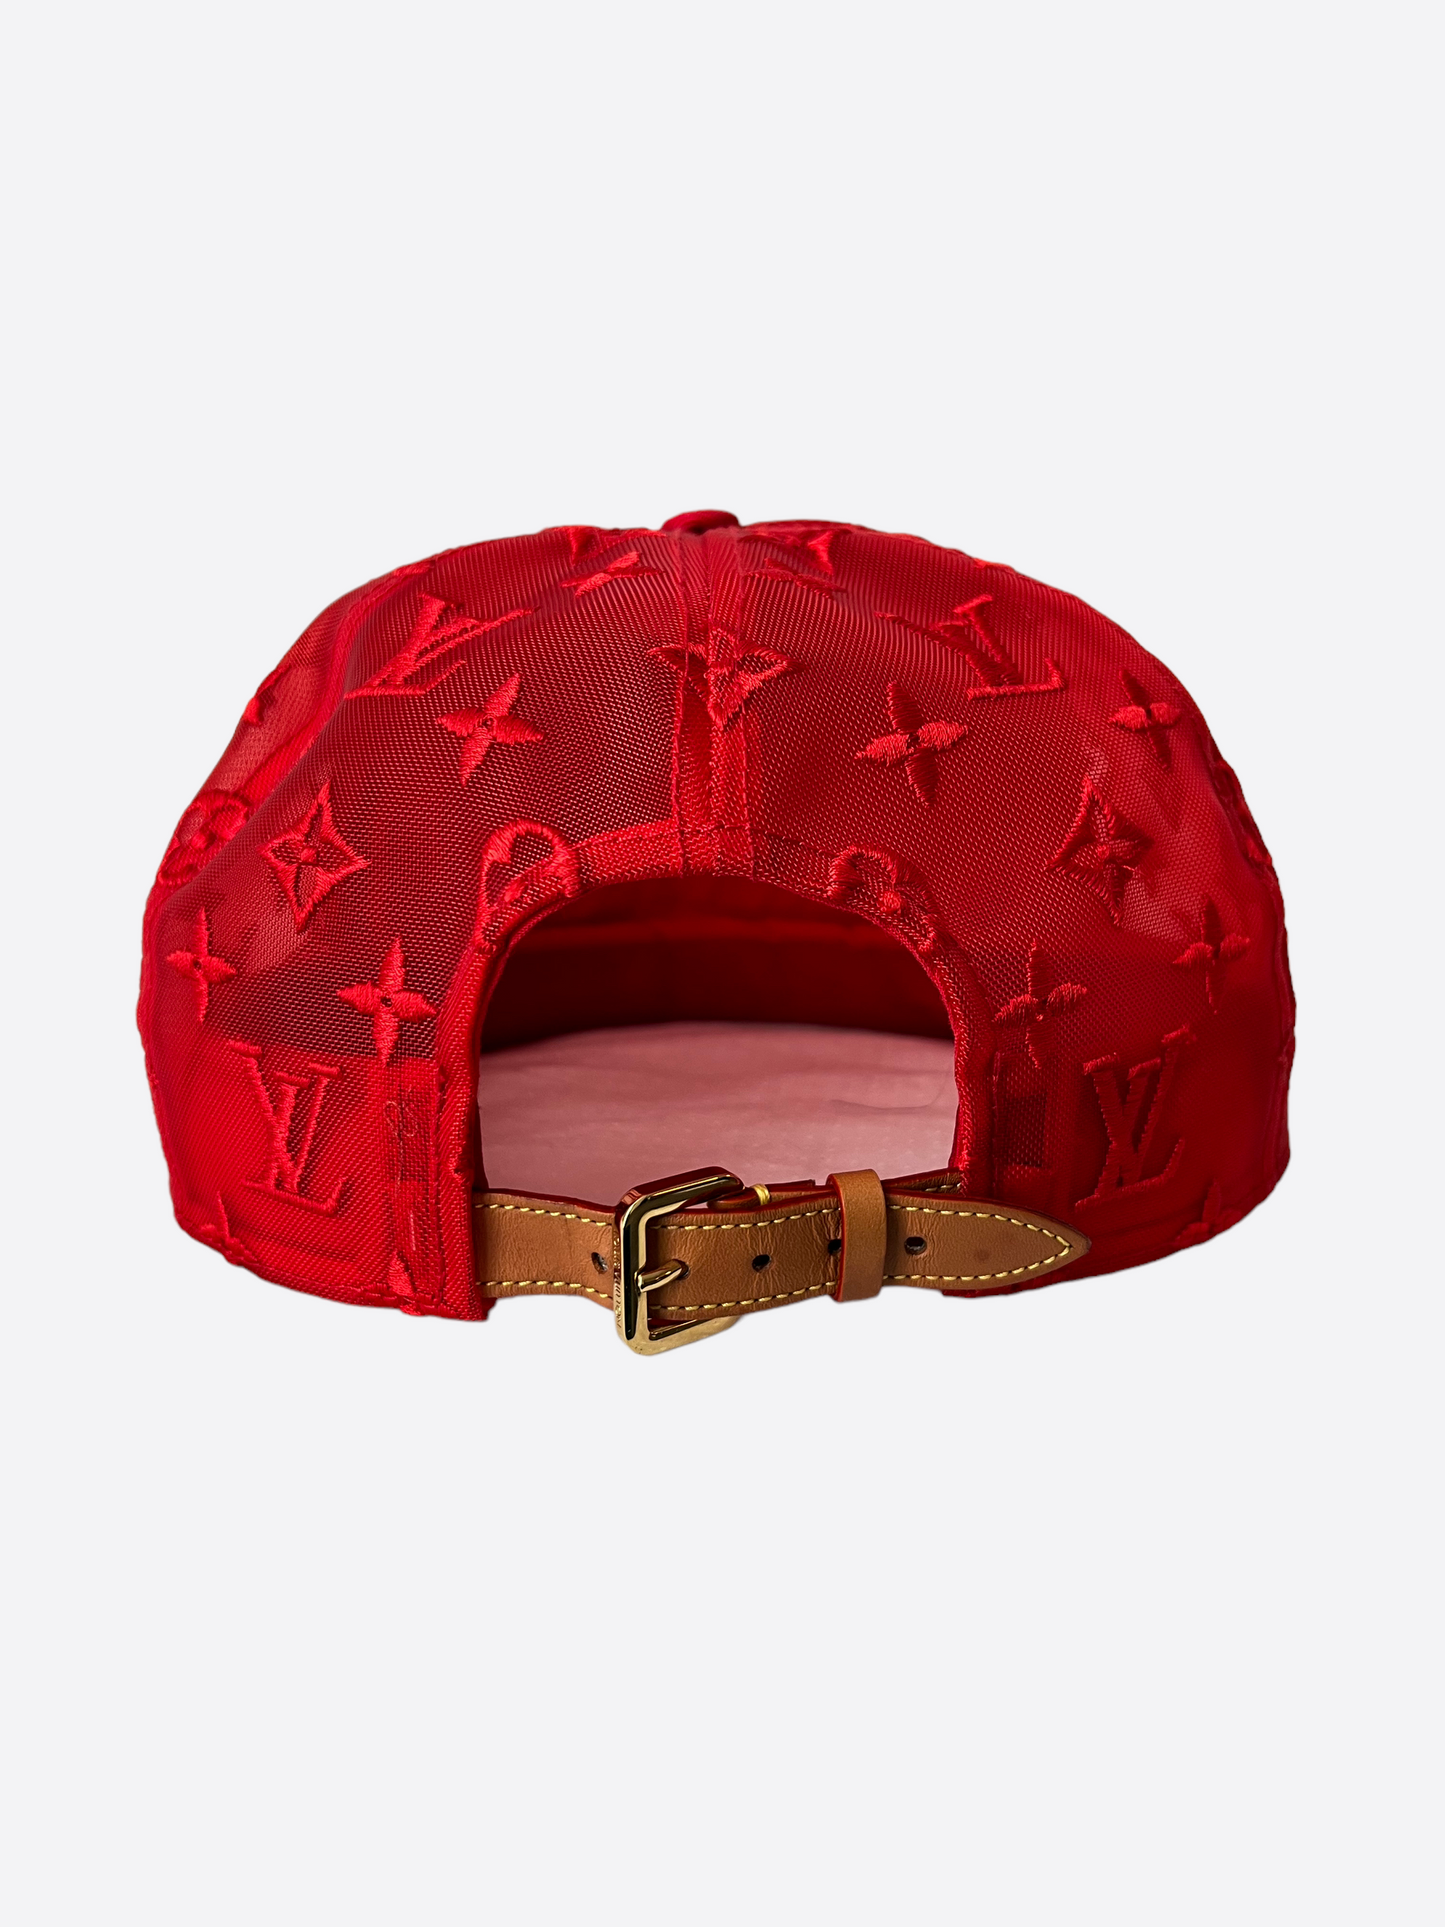 Louis Vuitton Everyday LV Embroidered Mesh Cap (Soho Exclusive